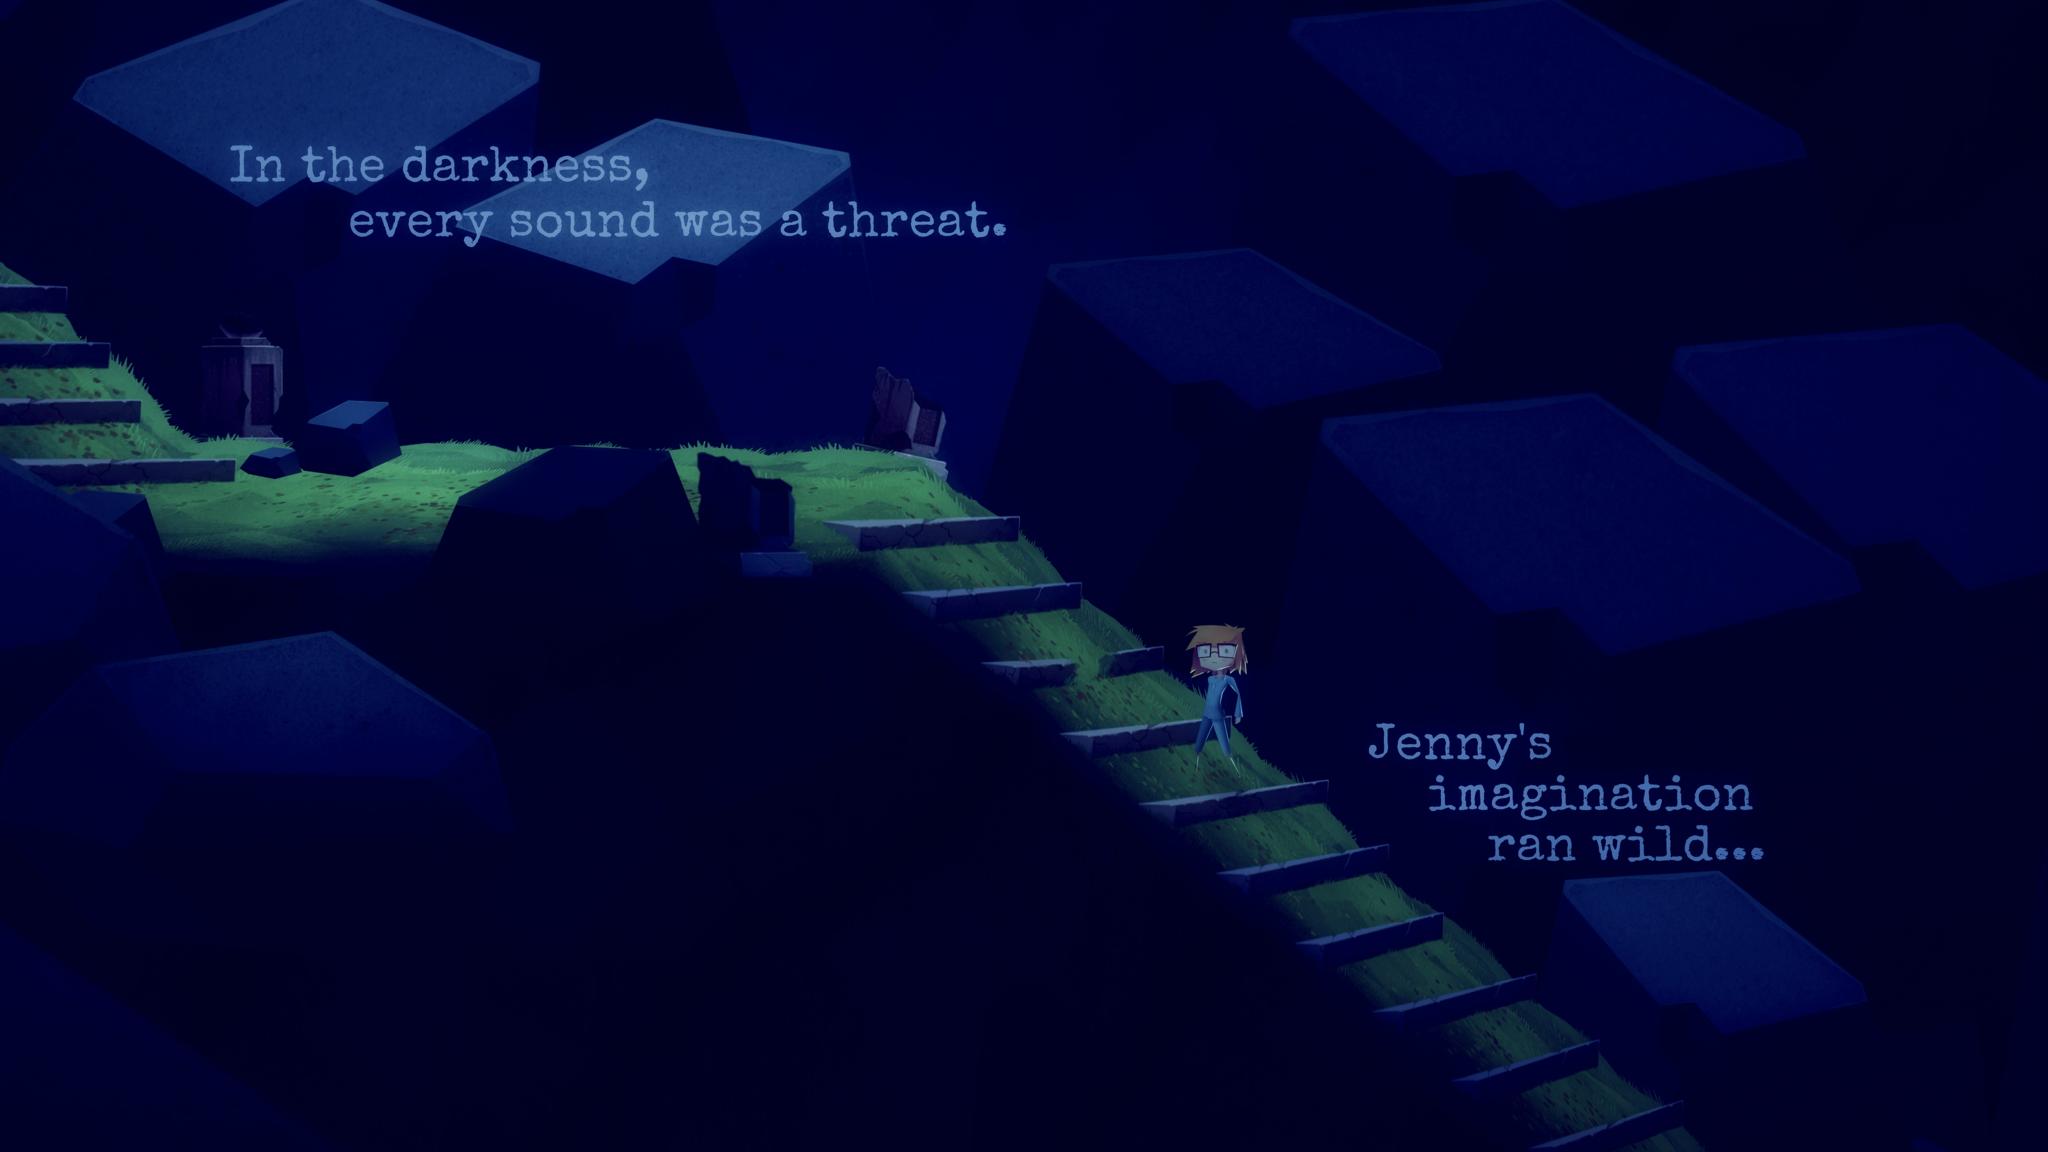 Integrating the author's text into the levels of the game marks just one of its clever visual touches.